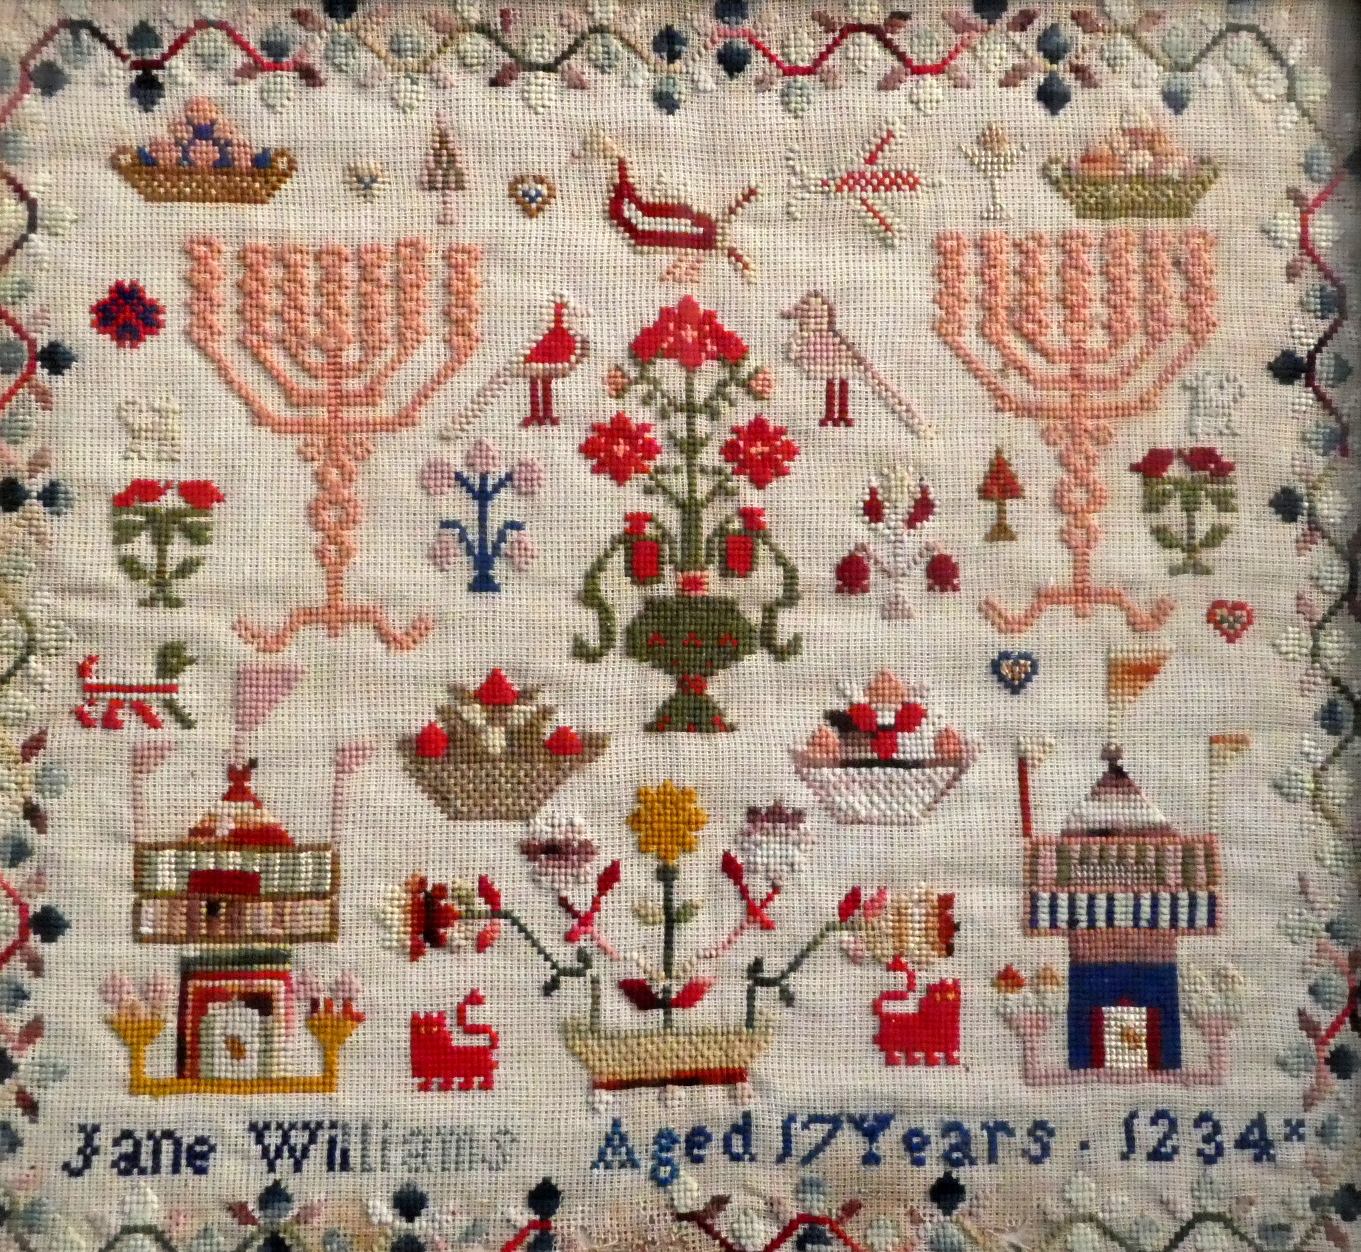 A William IV needlework sampler - showing flowers and birds, Jane Williams Aged 17 Years 1834, - Image 2 of 3